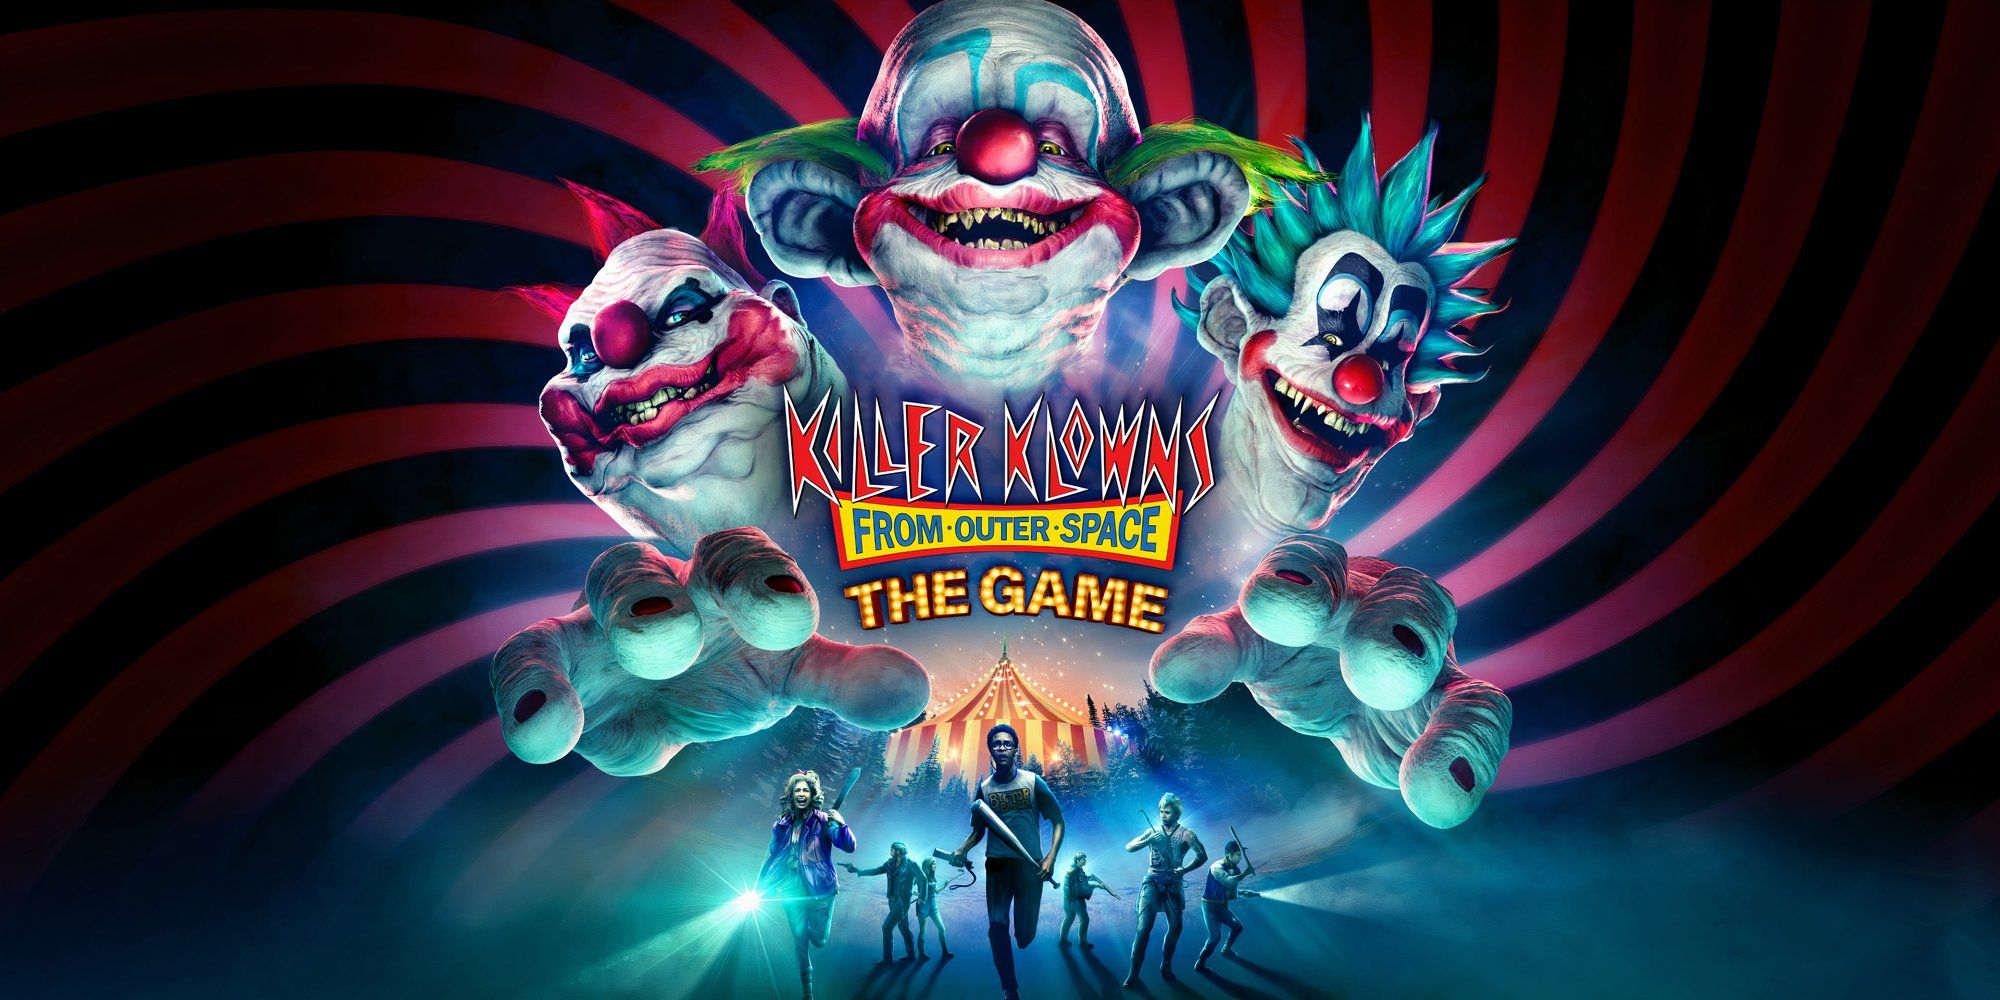 Three clowns with painted faces loom above a group of people, all of whom are running away from a circus tent and clutching weapons. The logo for Killer Klowns from Outer Space The Game appears in the center.